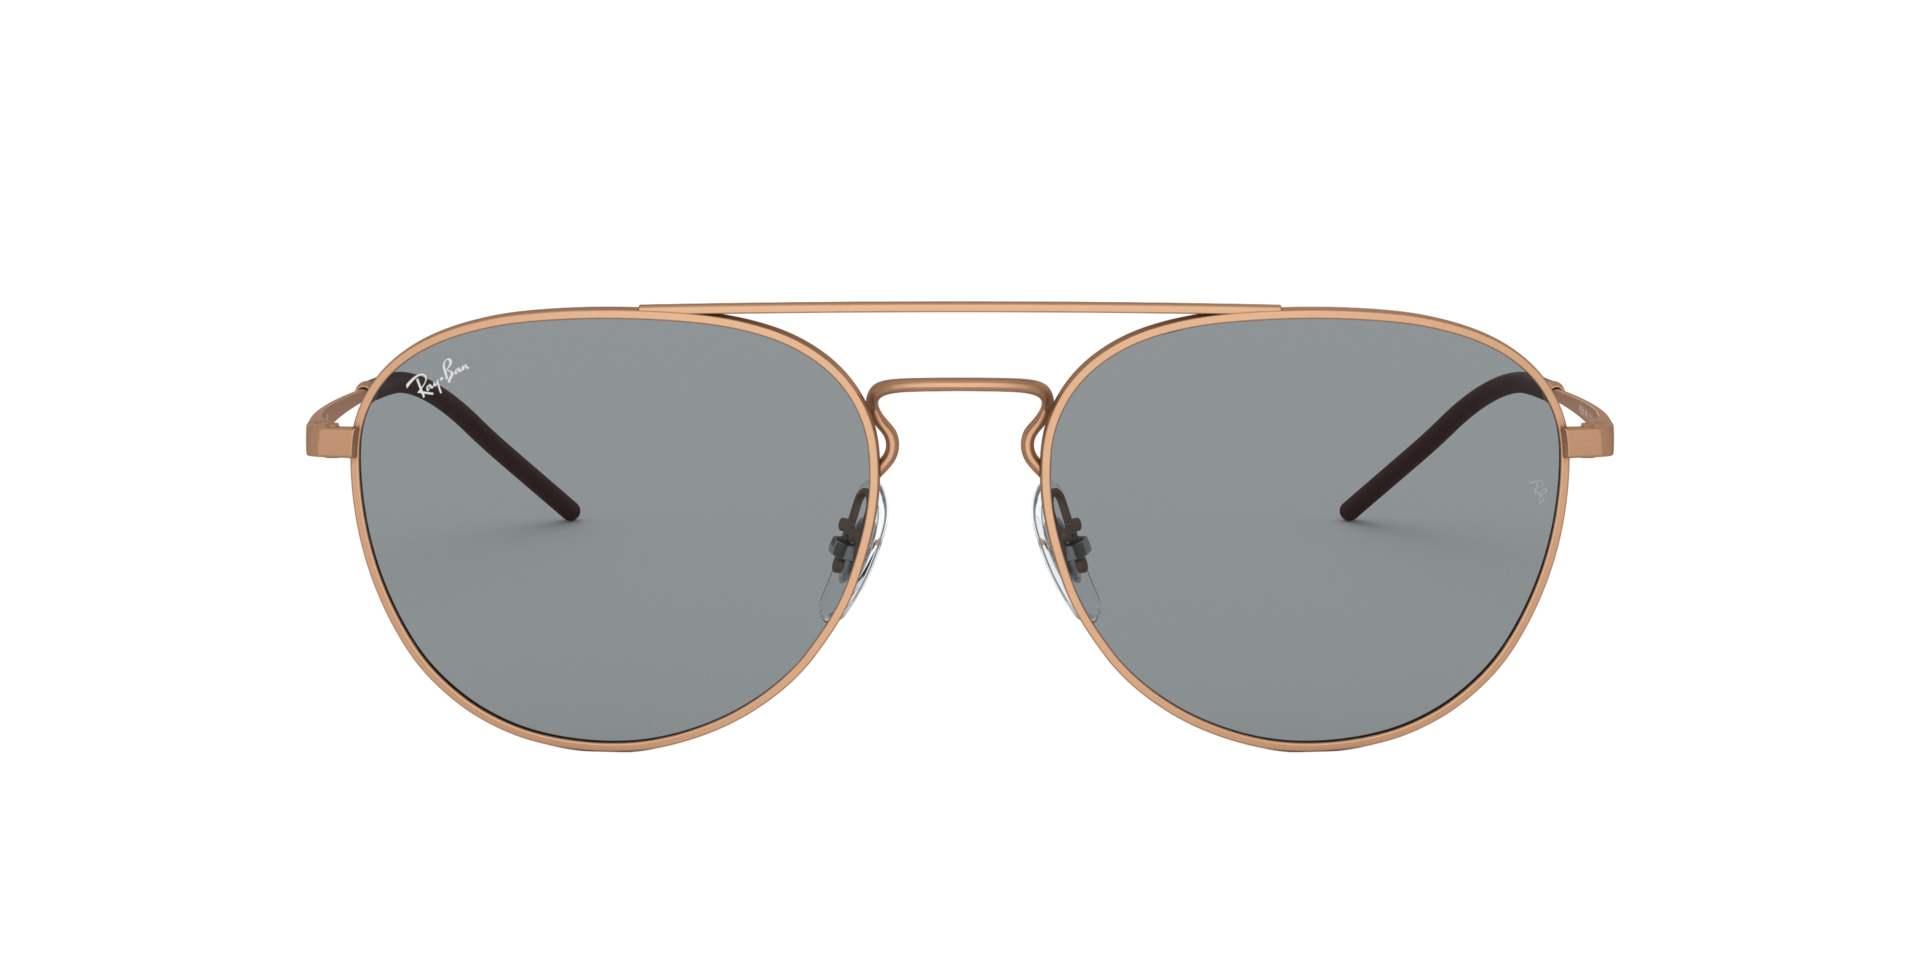 Buy Ray-Ban Rb3589 Sunglasses Online.